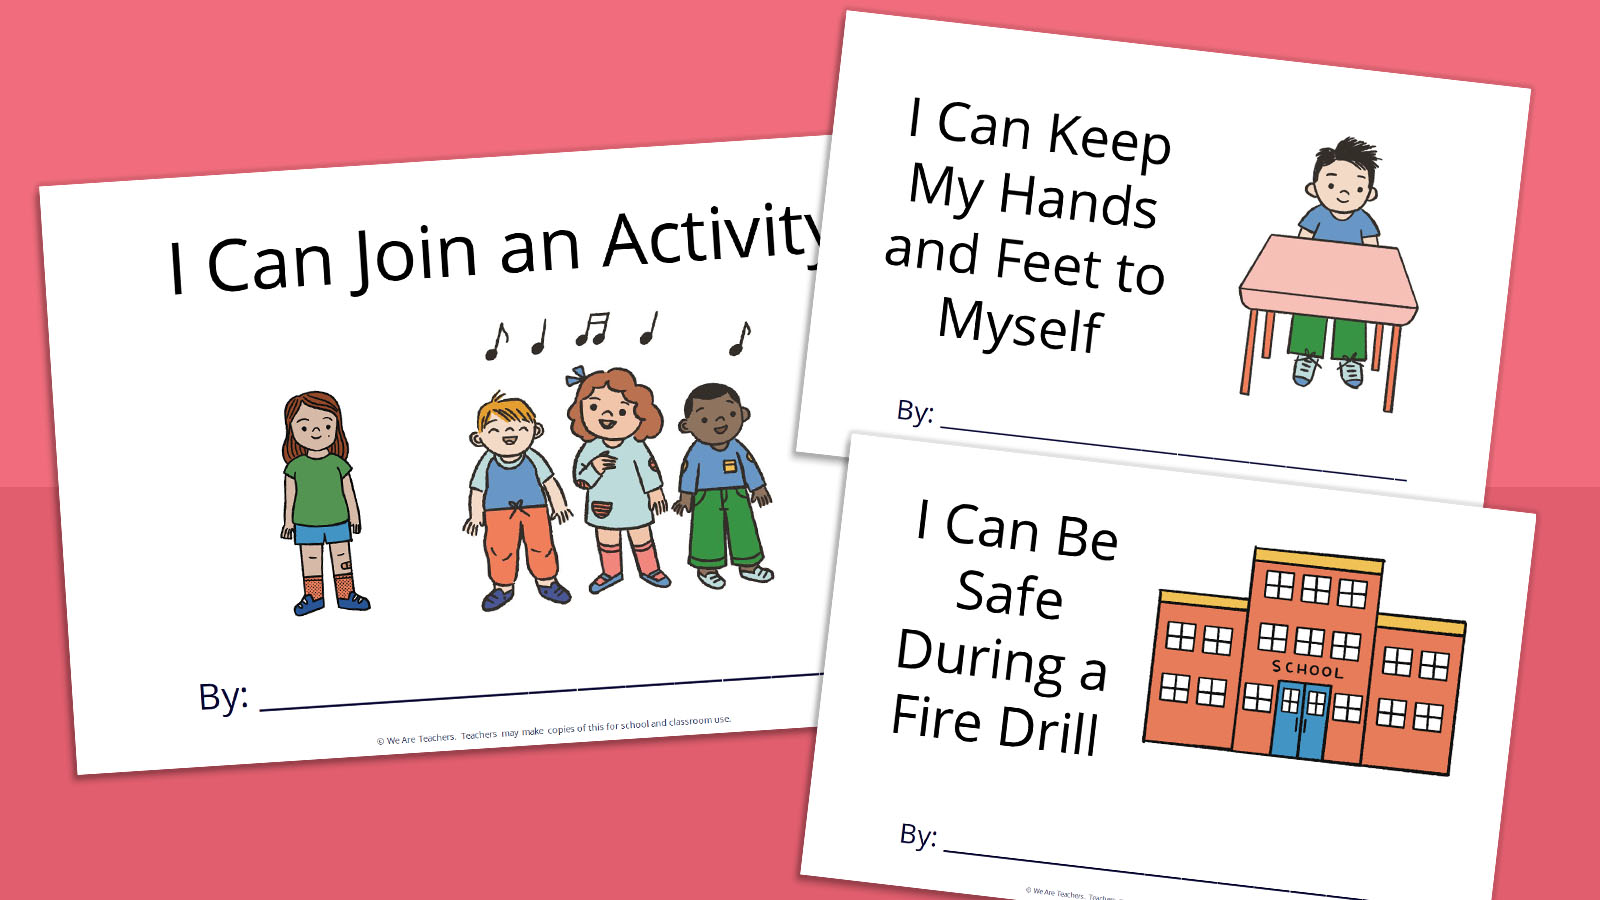 Printable social stories books for kids called I Can Join an Activity, I Can Keep My Hands and Feet to Myself, and I Can Be Safe During a Fire Drill.